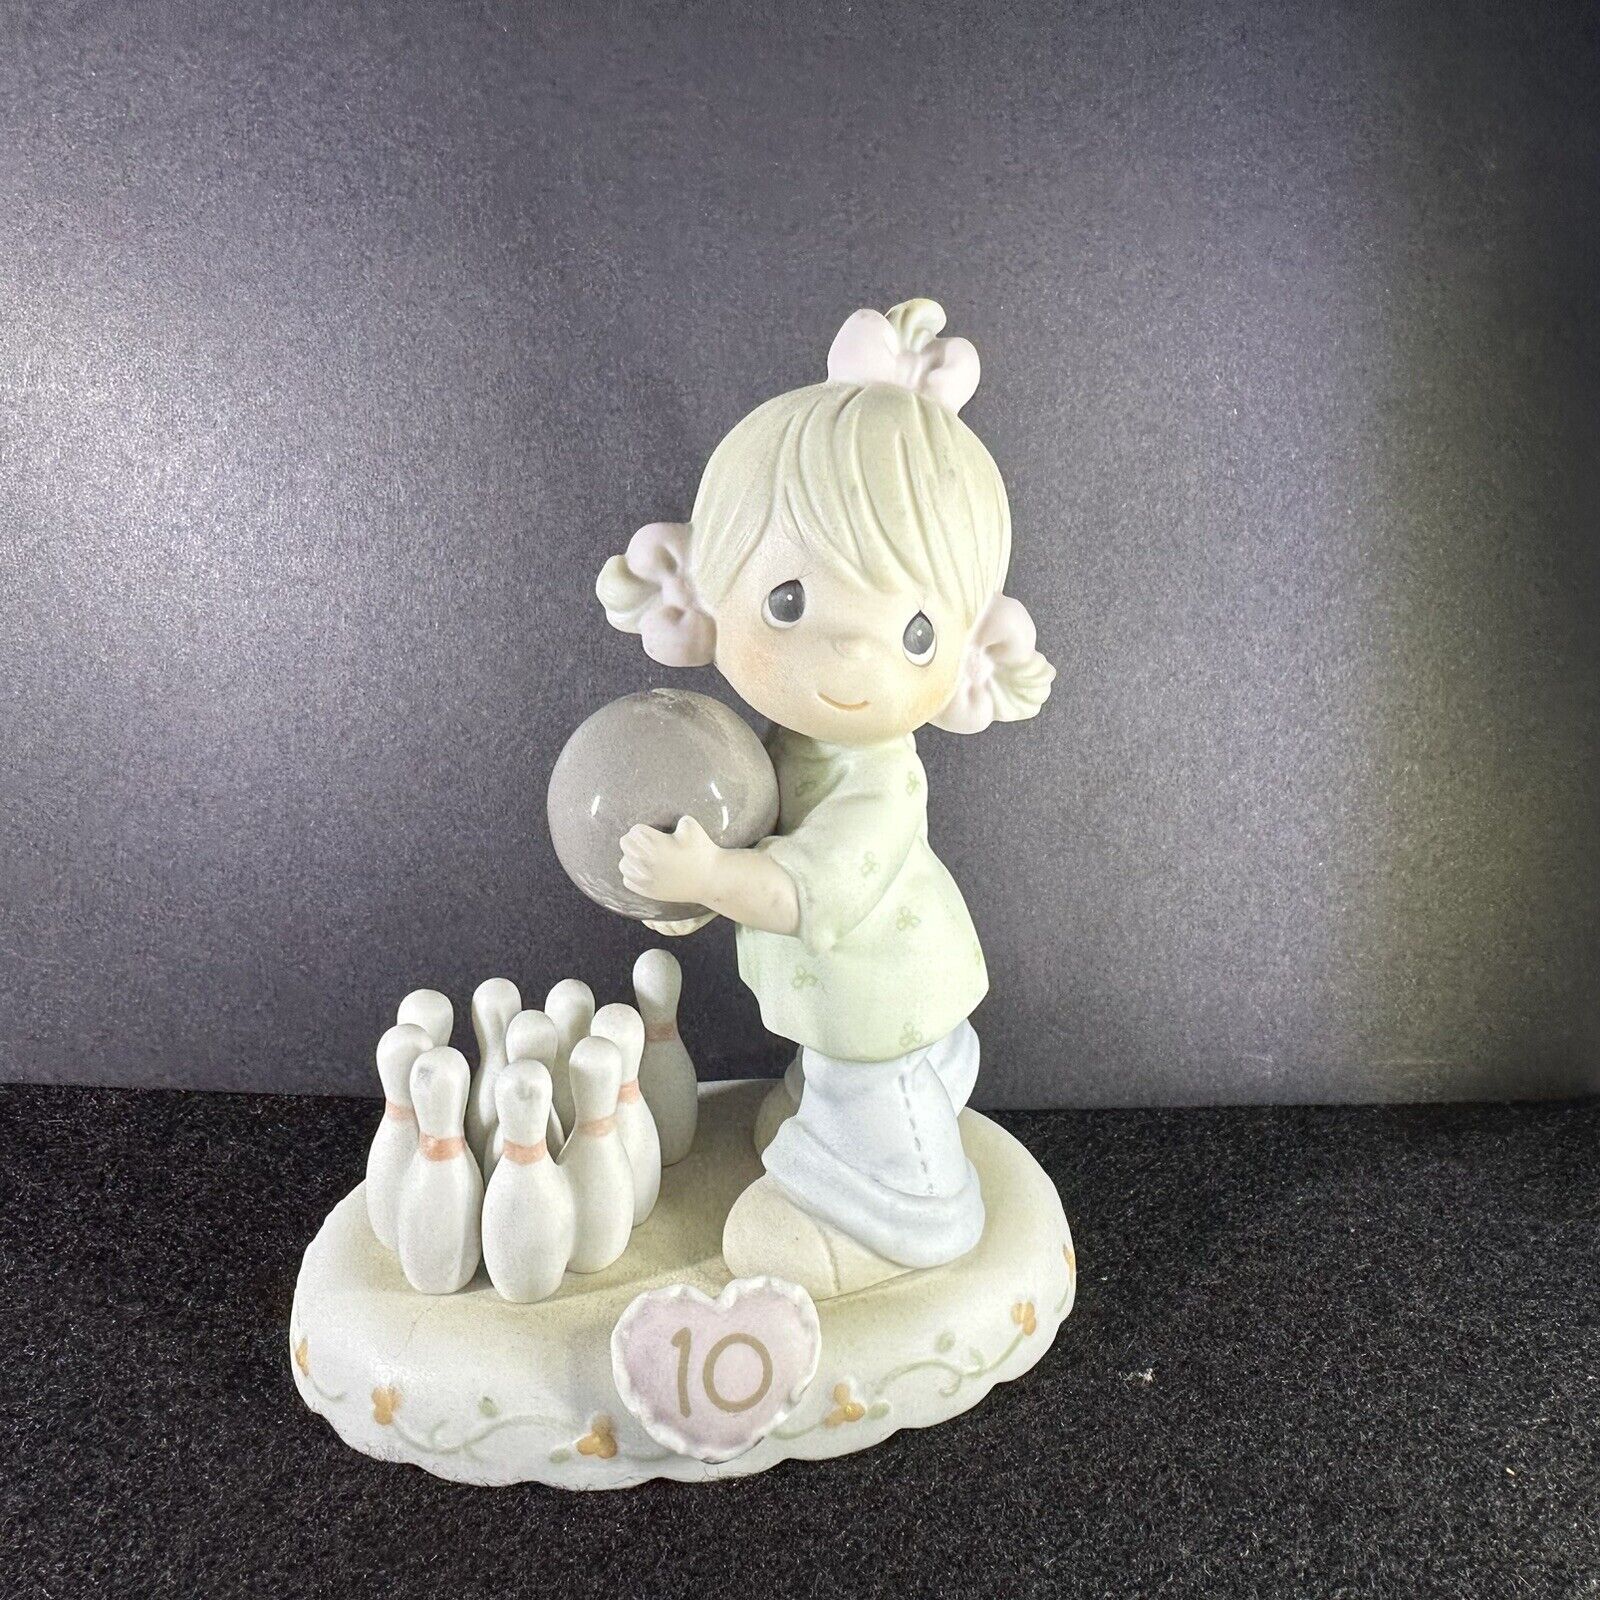 INCLUDES BOX - PRECIOUS MOMENTS GROWING IN GRACE AGE 10 #183873 1996 ENESCO